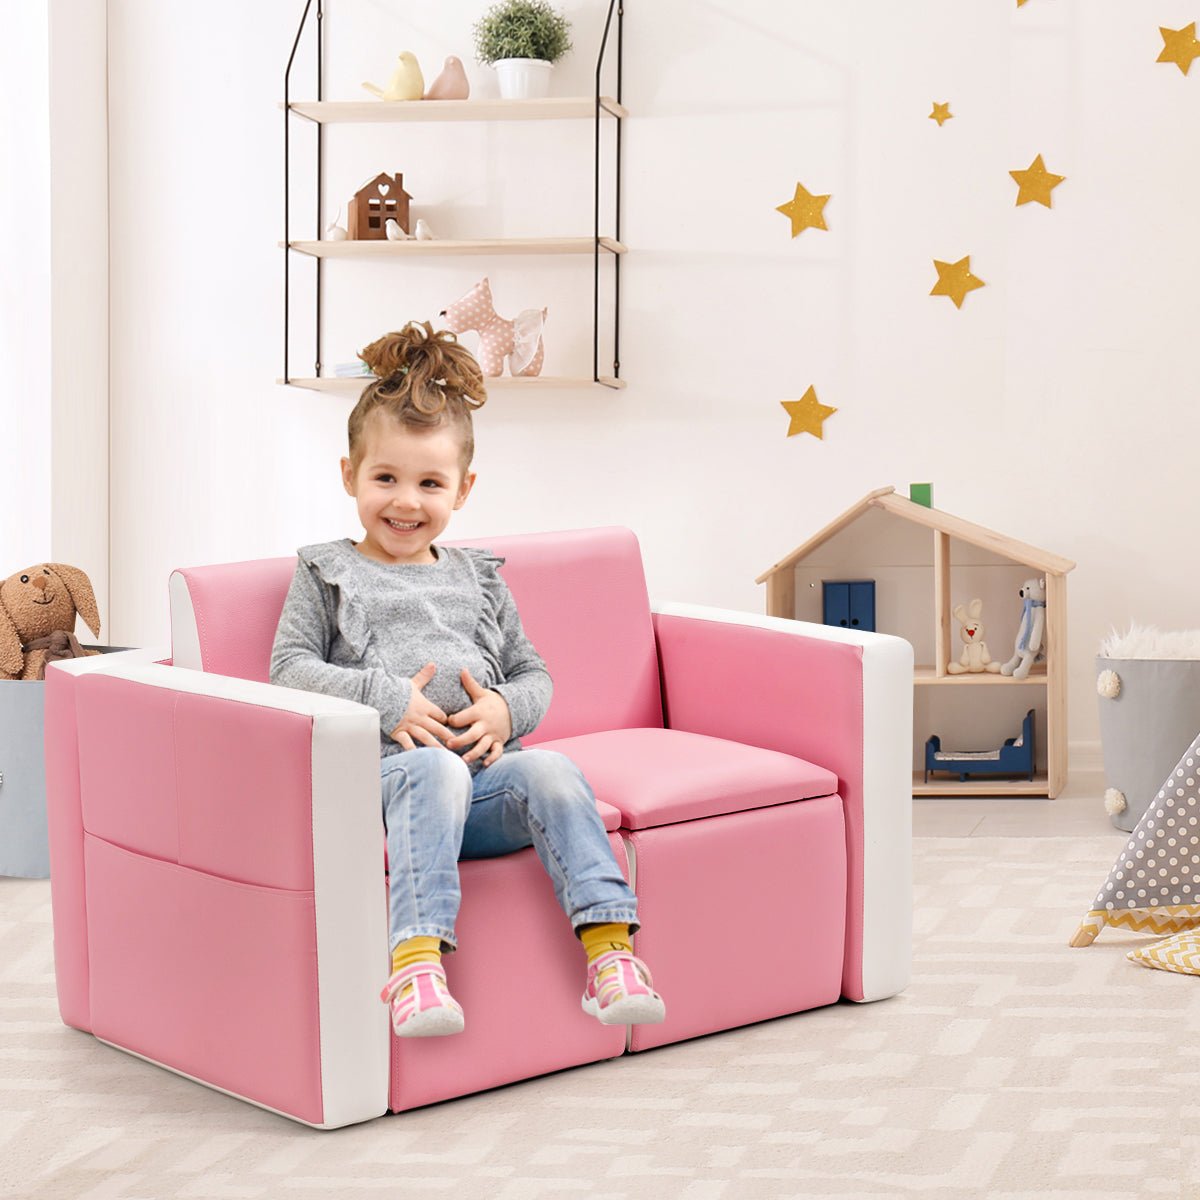 Pink Children's Sofa with Wooden Frame and Storage - Relaxation and Order